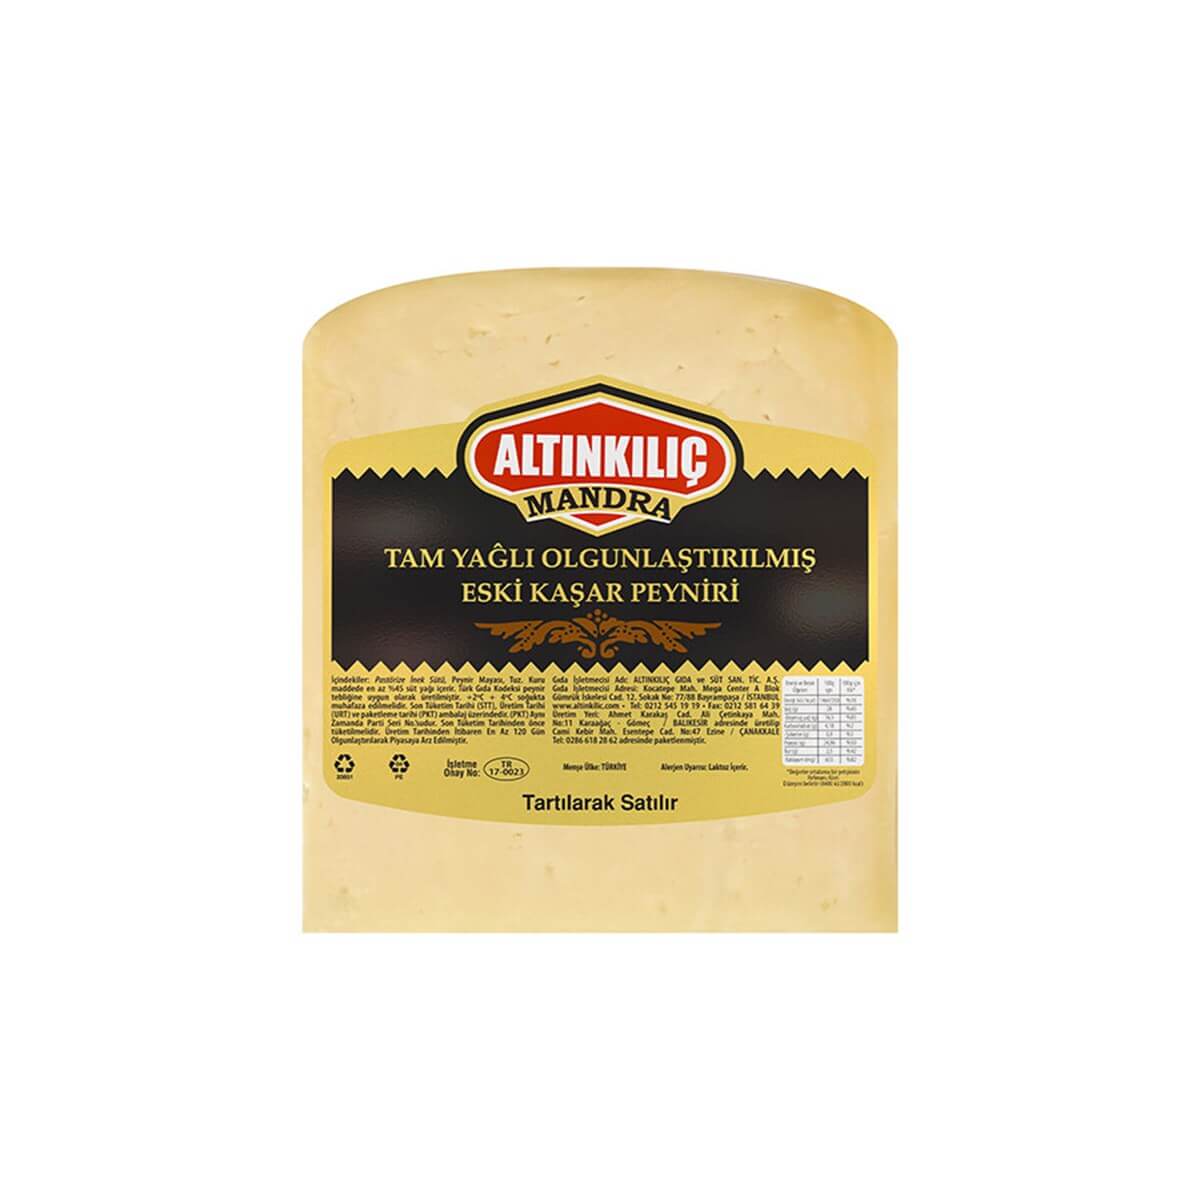 Altinkiliç Thrace Luxury Aged Kasseri (Kasar) Cheese 1kg - Shop Cheese at  Baqqalia.com - Best Brands and Products - Free Worldwide Shipping Over $150